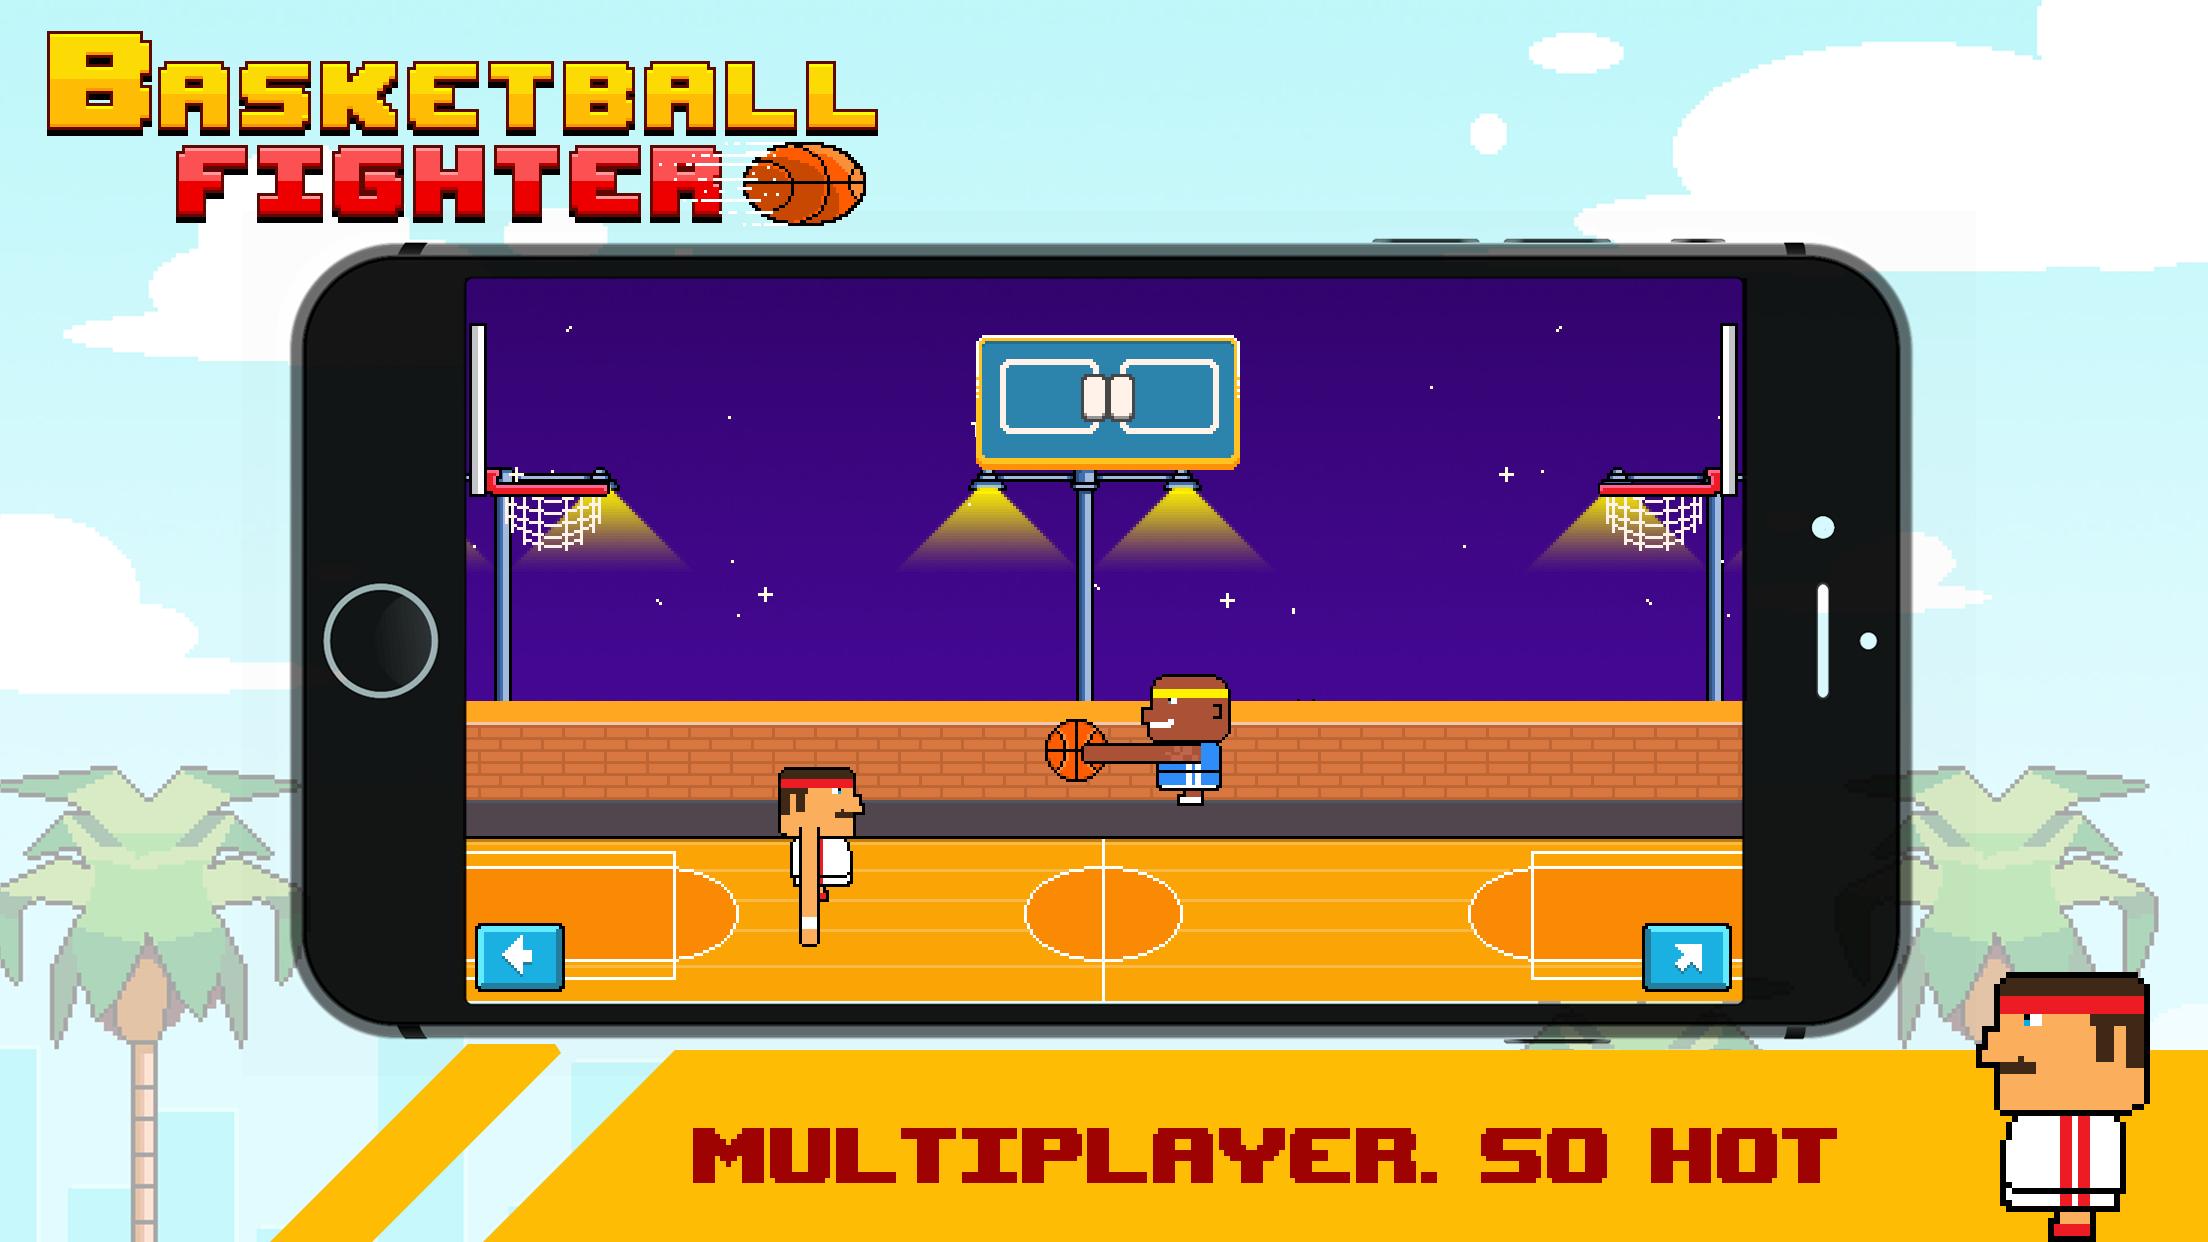 Two player 2. Player геймс. Y8 games 2 Player. Basketball game 2 Player. Баскетболист 2d.